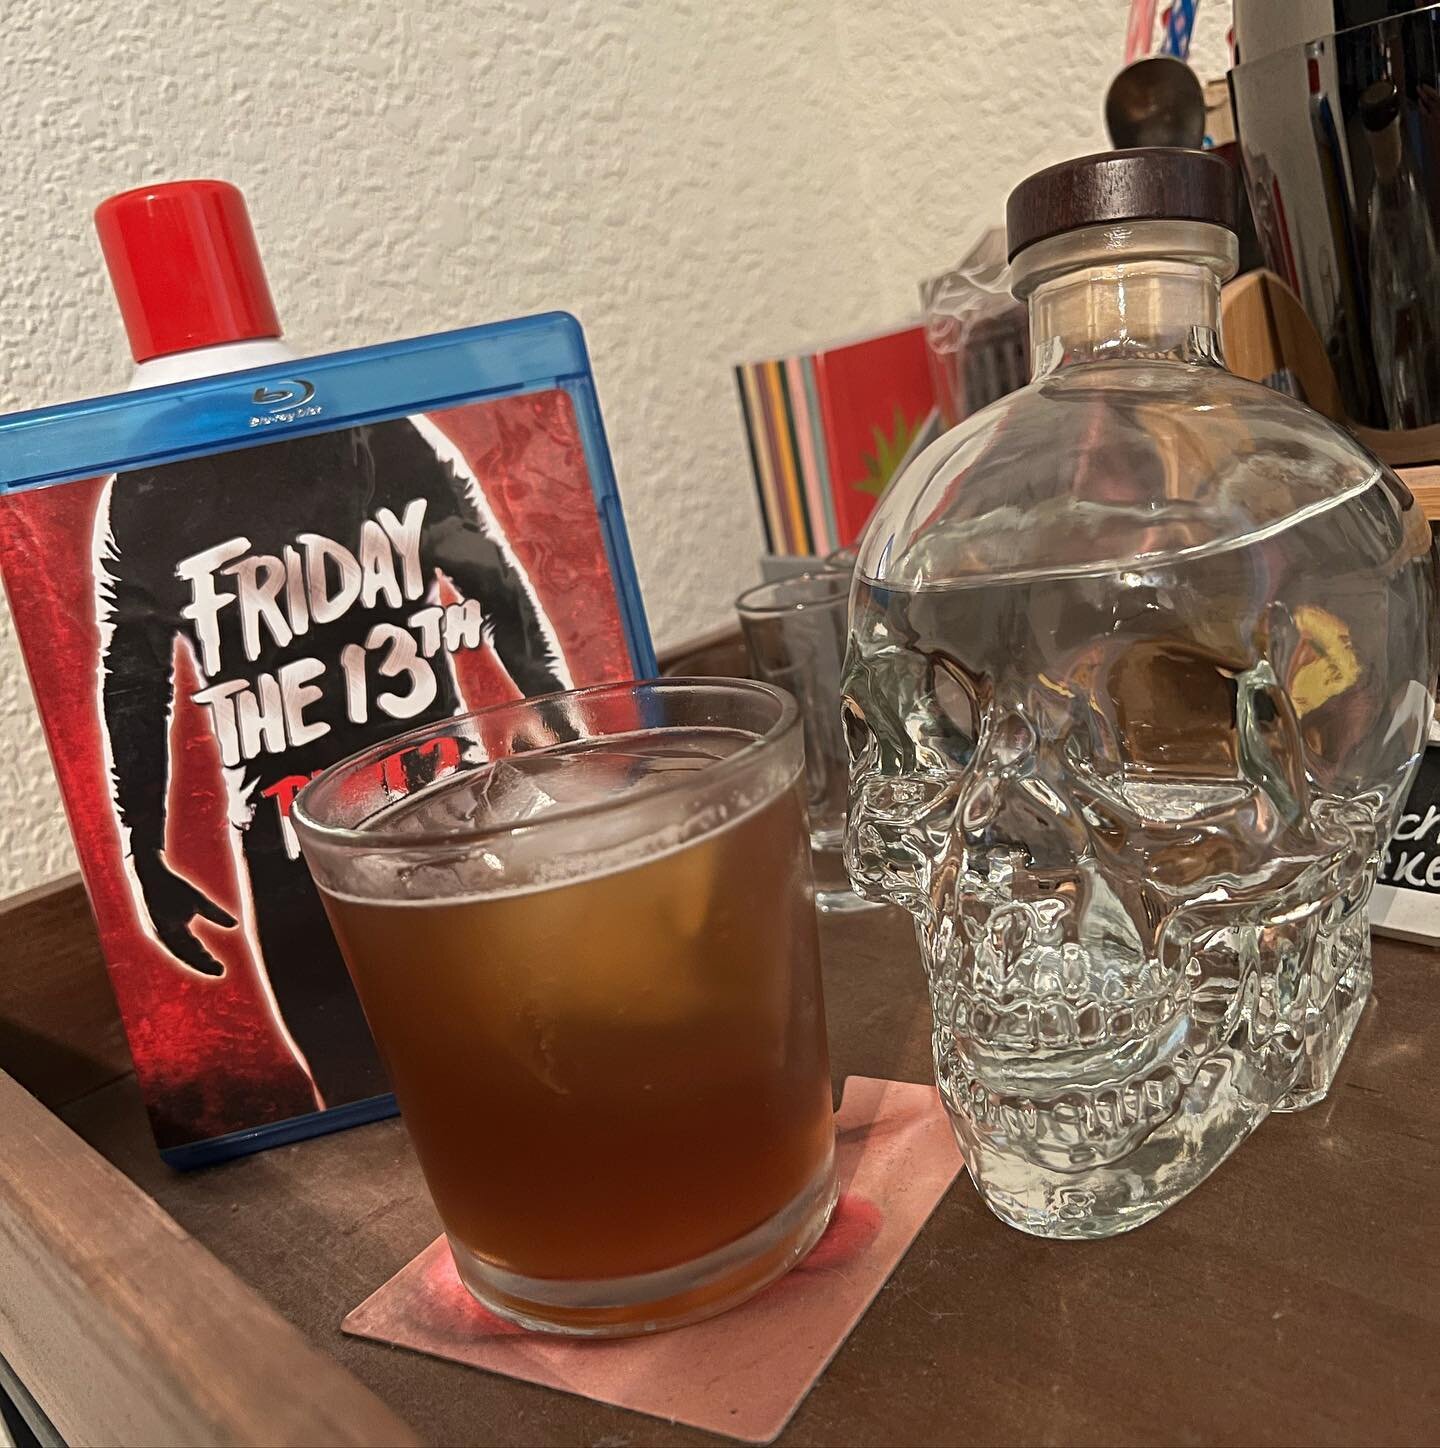 Friday the 13th Part 2 and some Lake Water

&bull;.5oz tequila
&bull;.5oz rum
&bull;.5oz gin
&bull;.5oz vodka
&bull;.5oz triple sec
&bull;.5oz simple syrup
&bull;.5oz lemon juice
&bull;Top with cola